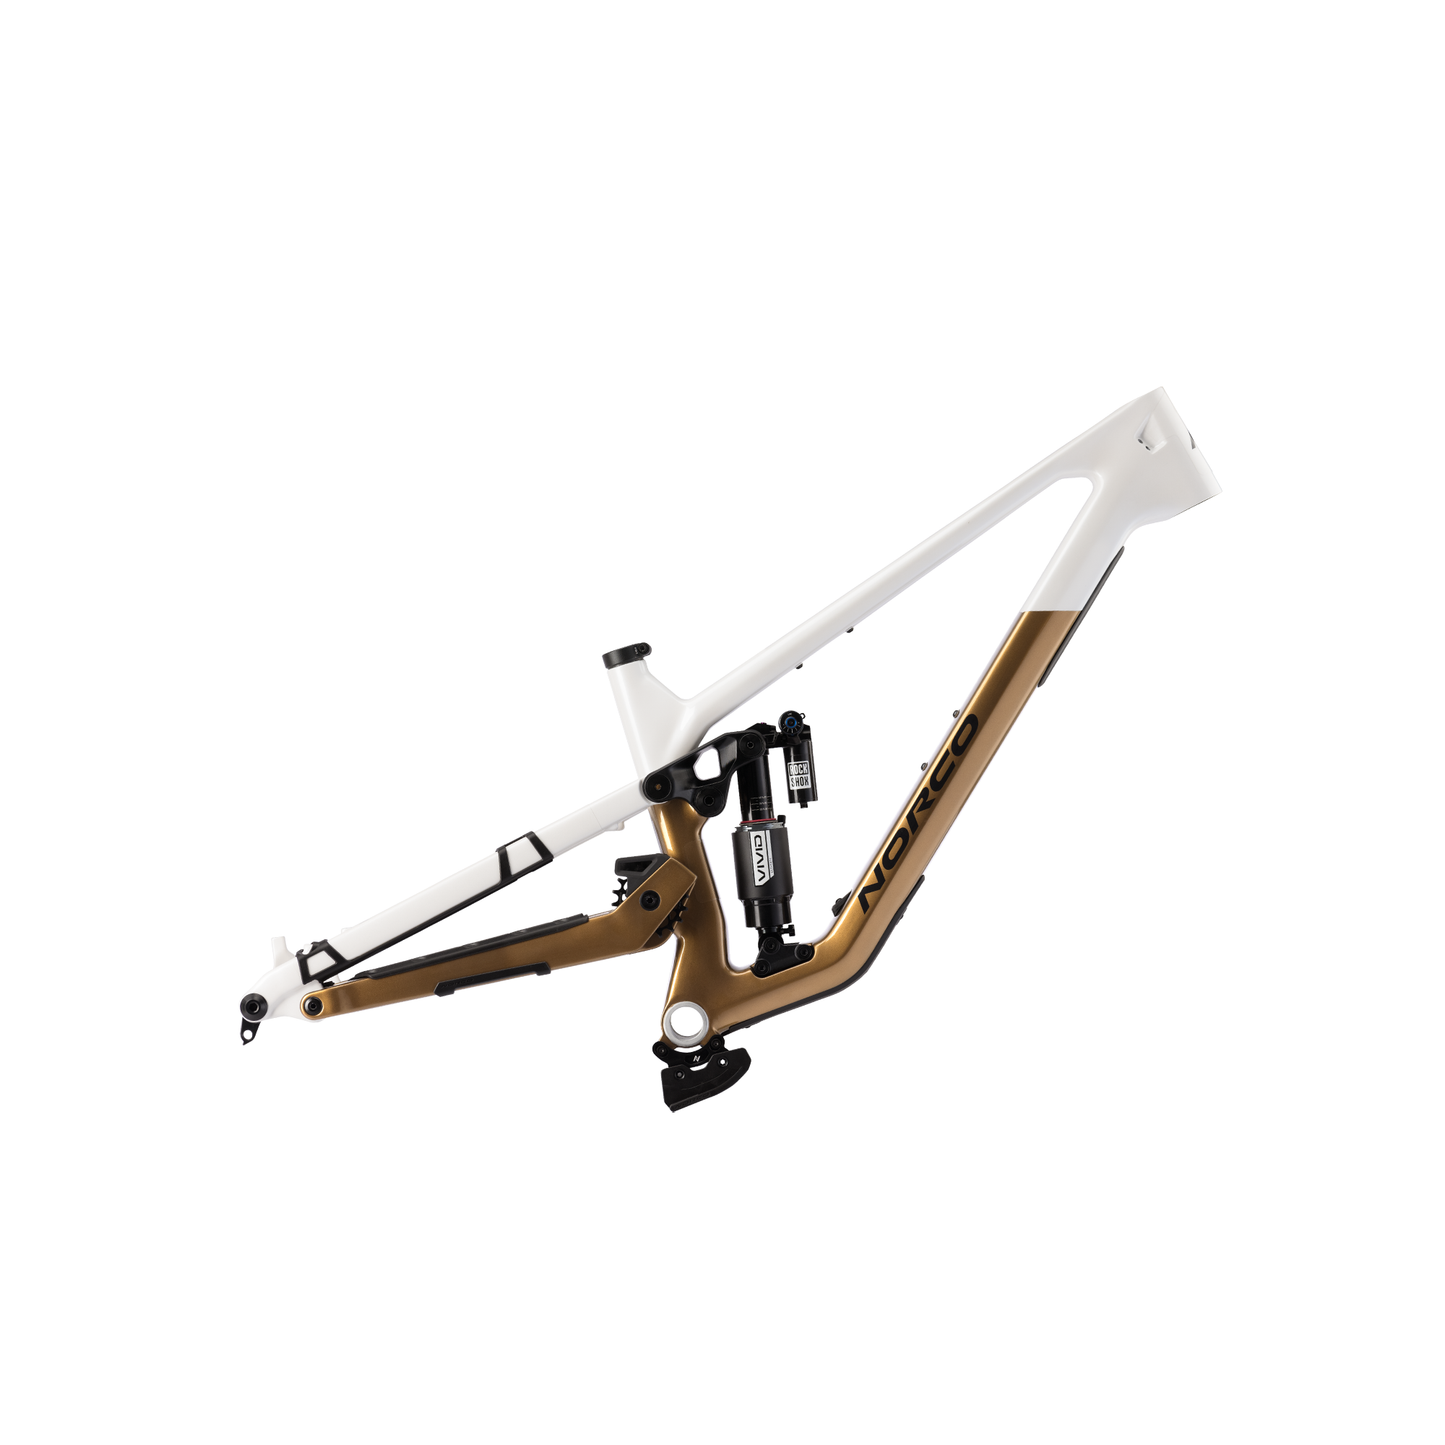 Norco Sight C Frame